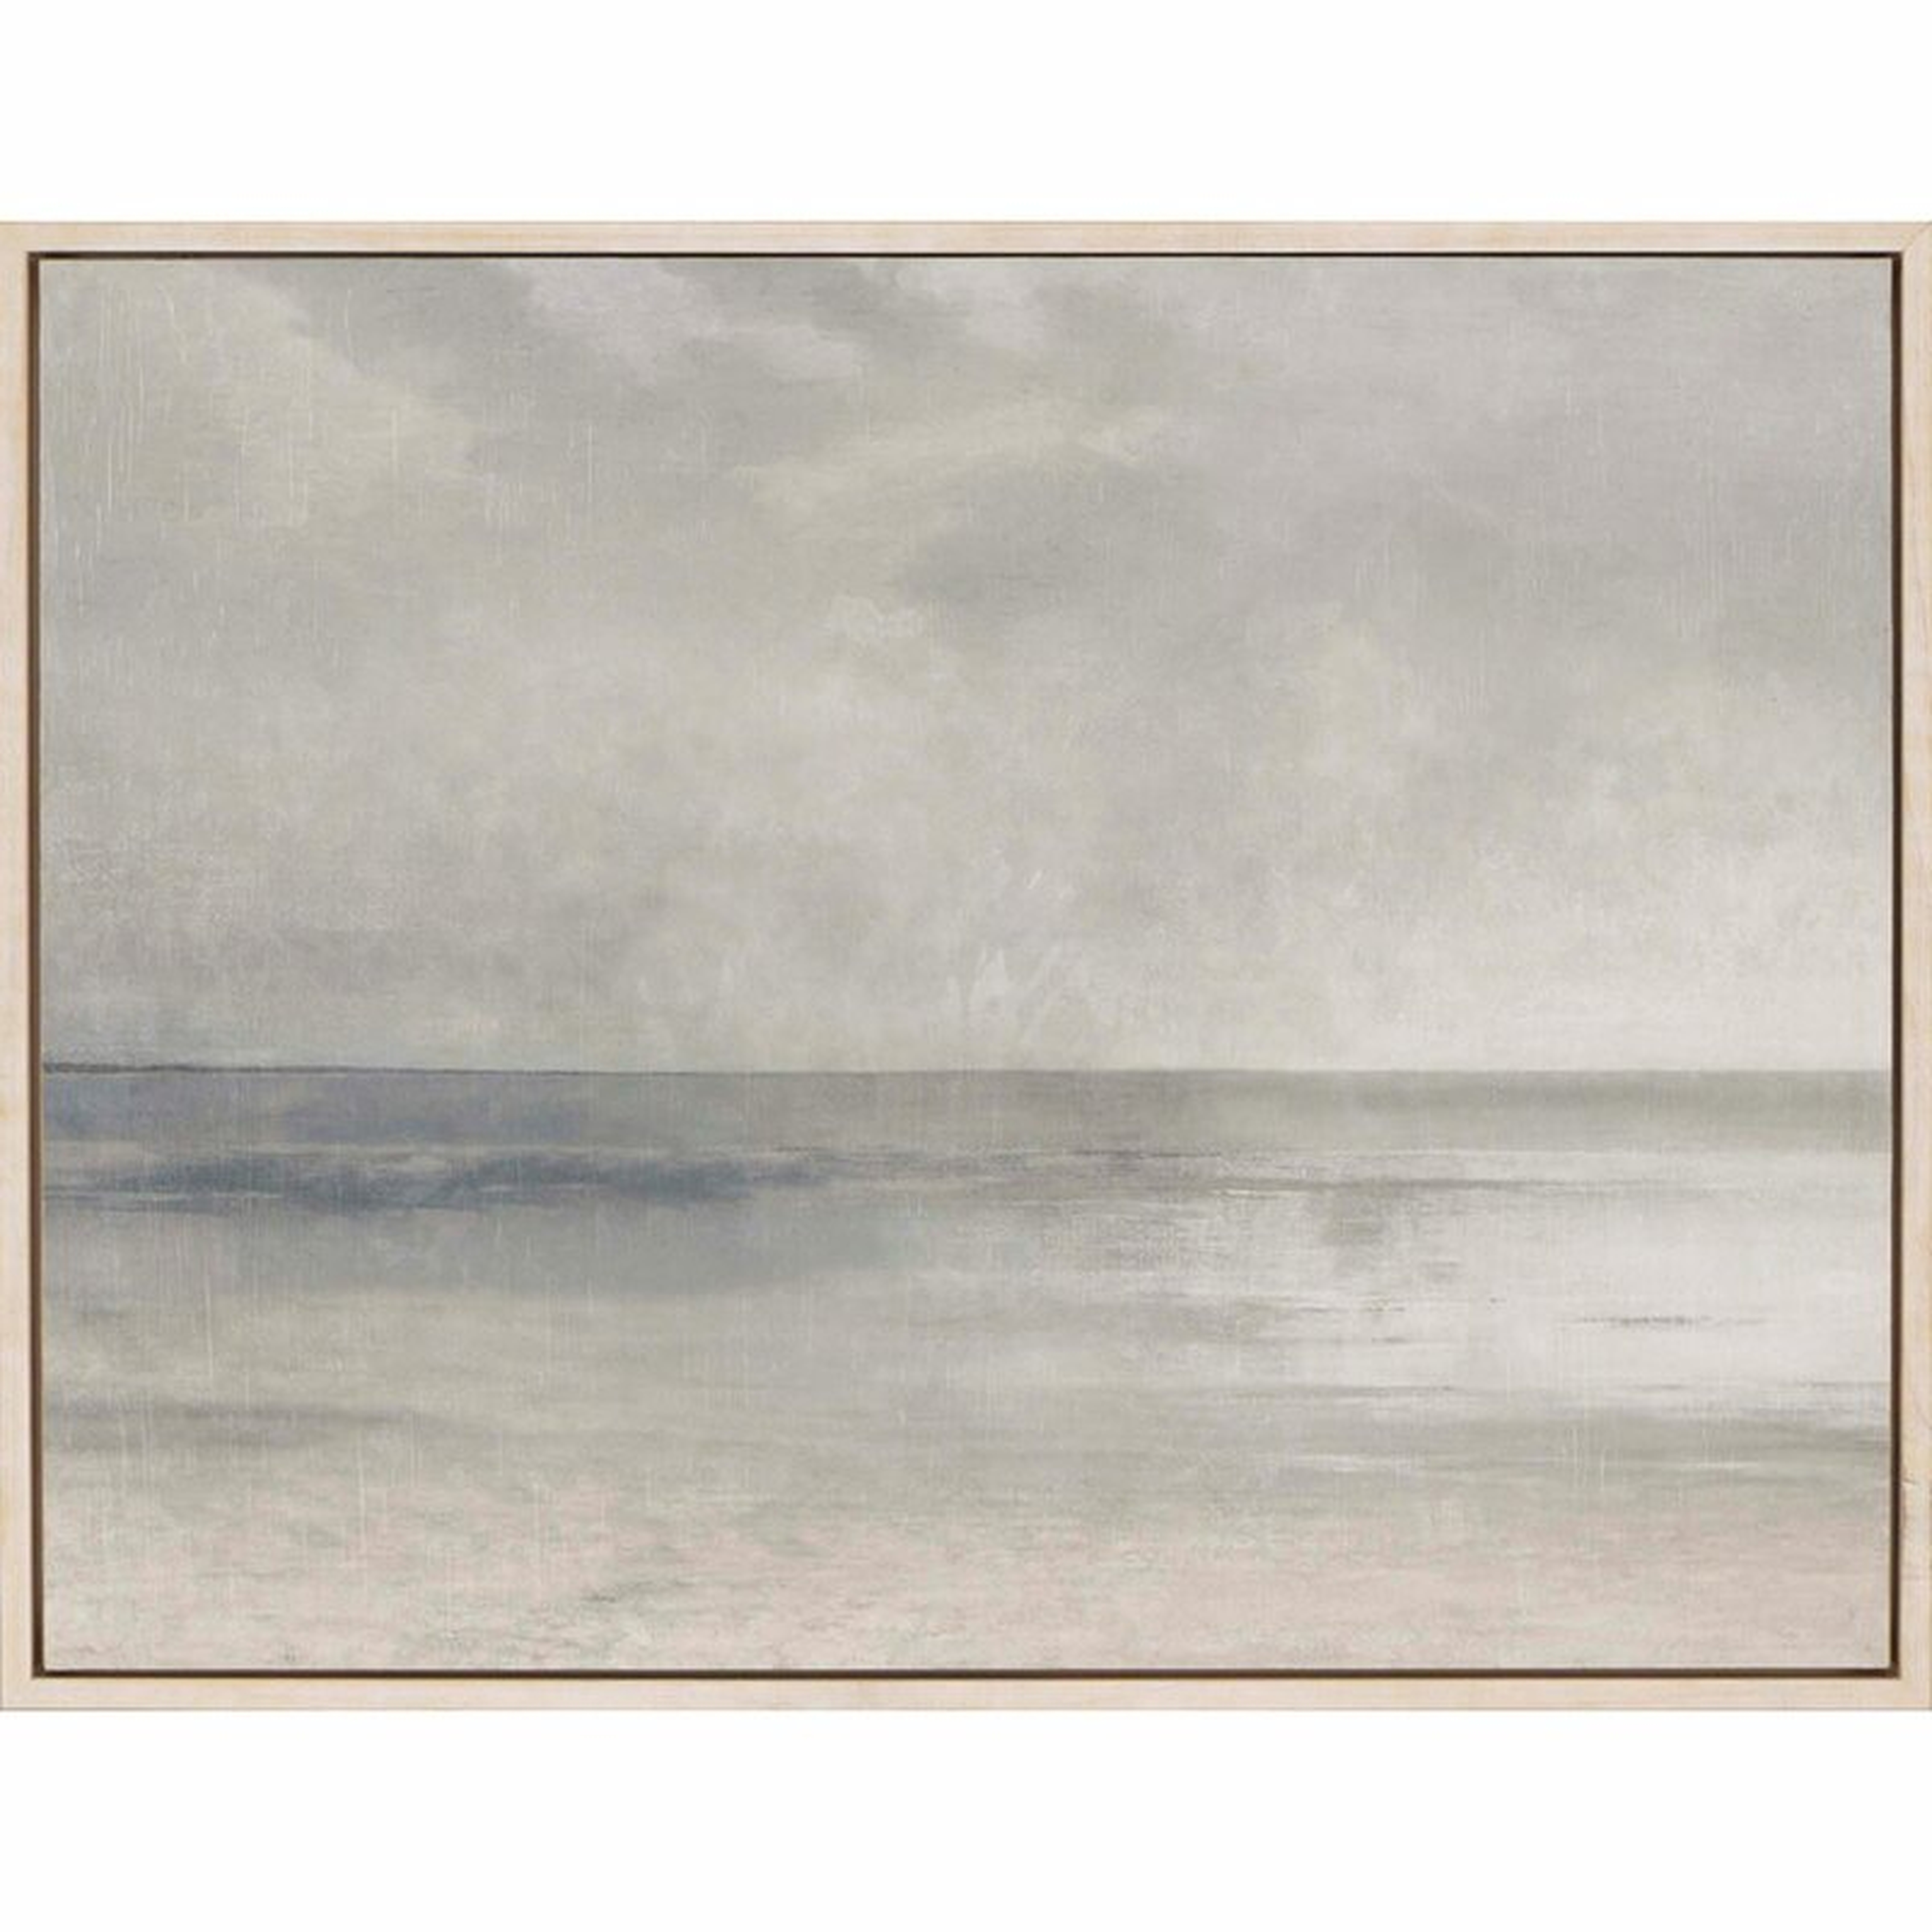 Paragon Pastel Seascape II by McKee - Painting Print - Perigold